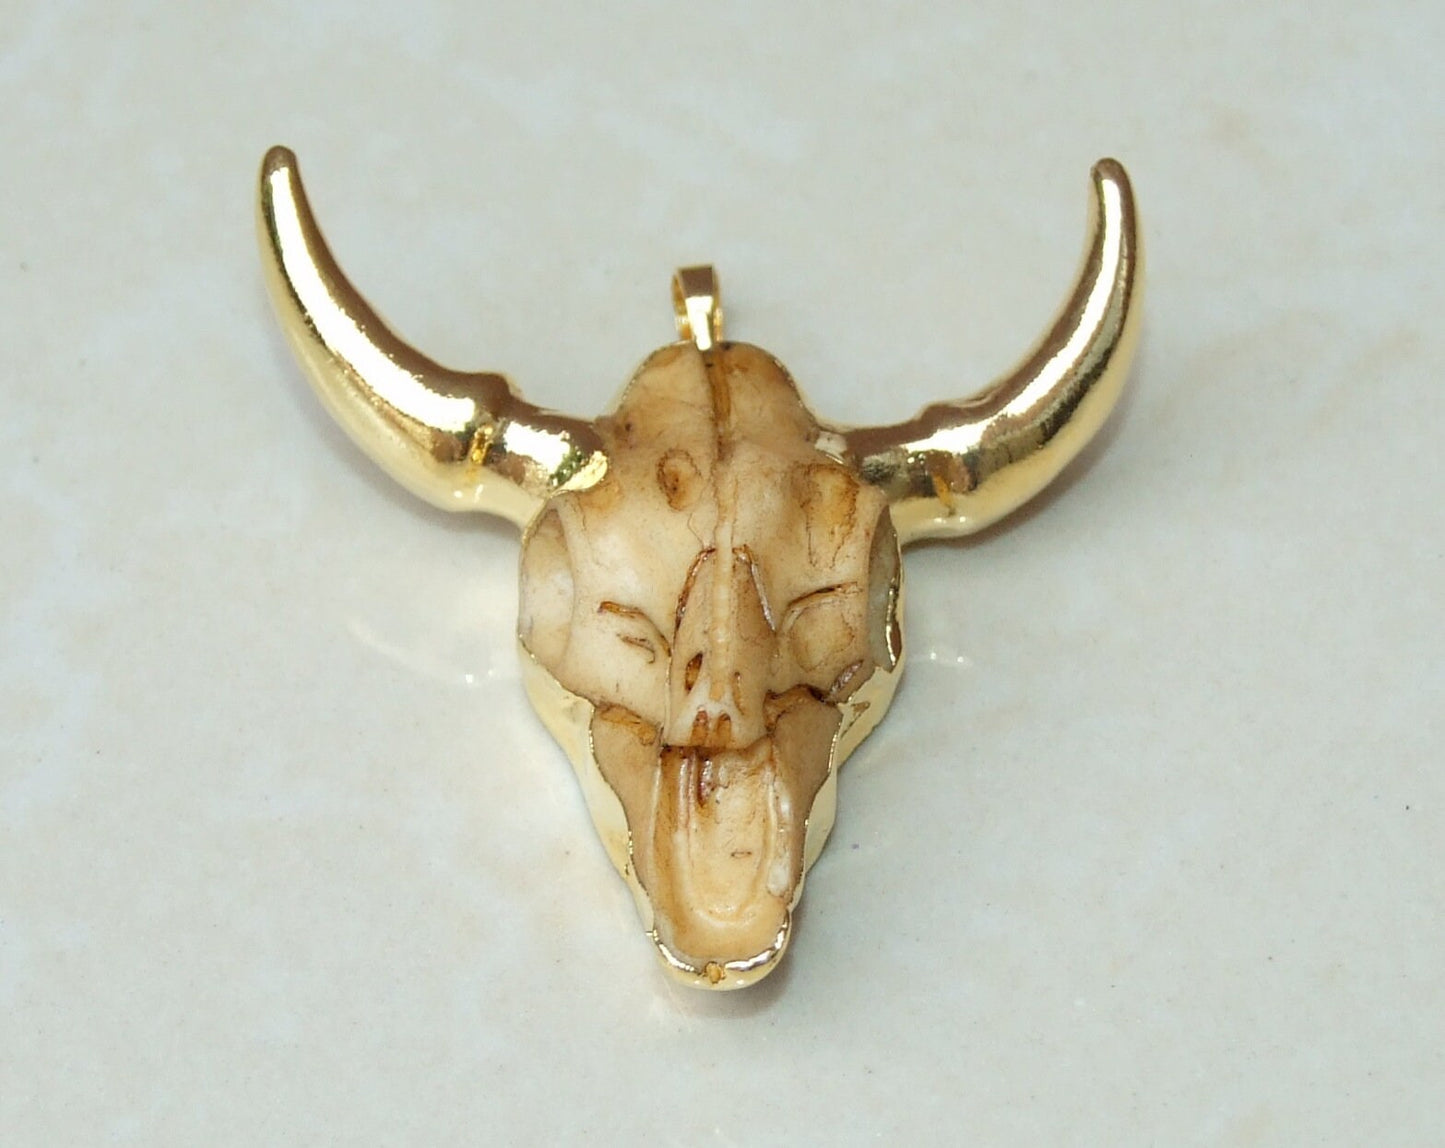 Gold Plated Longhorn Cattle Skull Pendant - Skull Pendant - Buffalo Skull Pendant - Cow Horn - Charm- Gold Plated - 45mm x 45mm